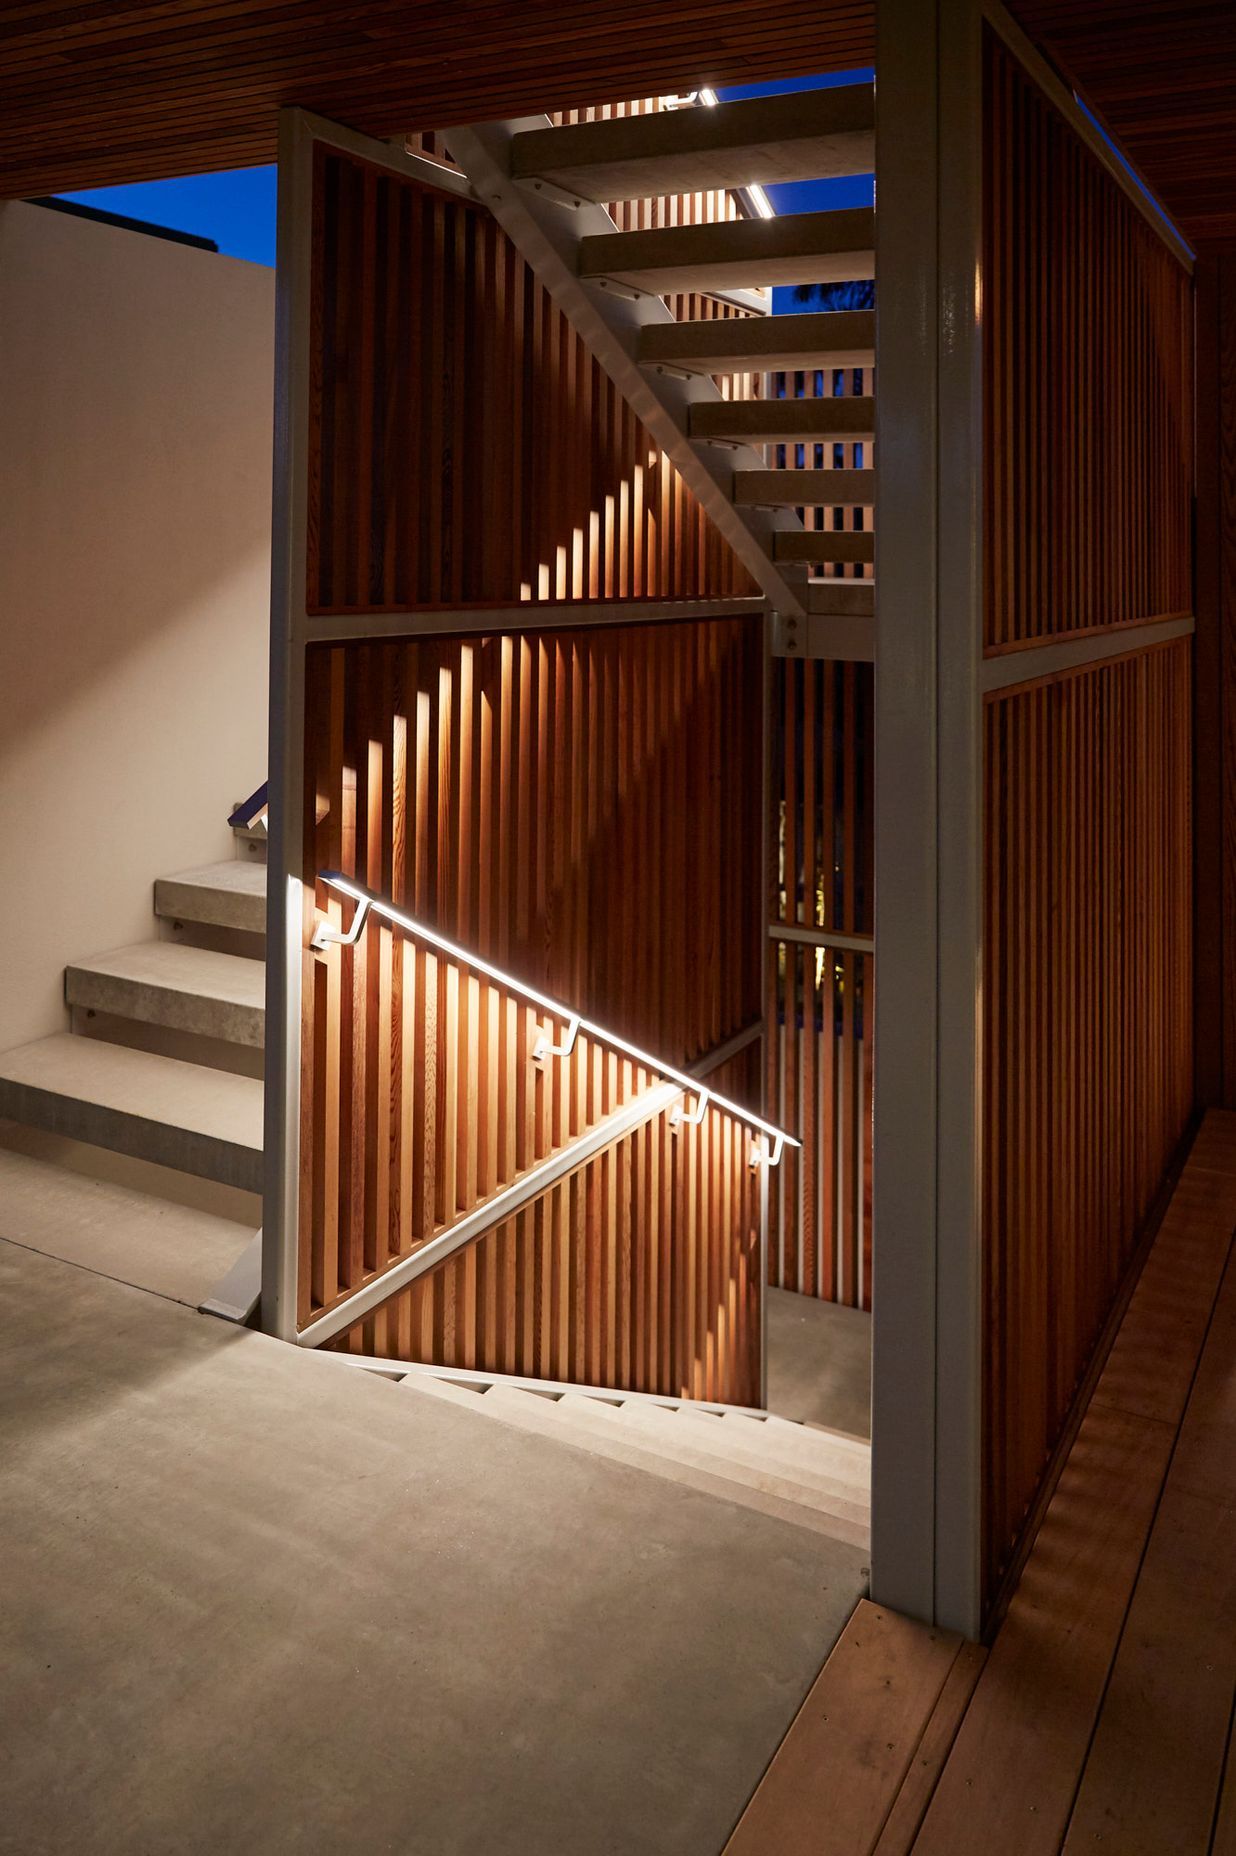 Custom built stairwell handles feature under-lit lighting to guide during darkness. Calley Homes | Tauranga Builders